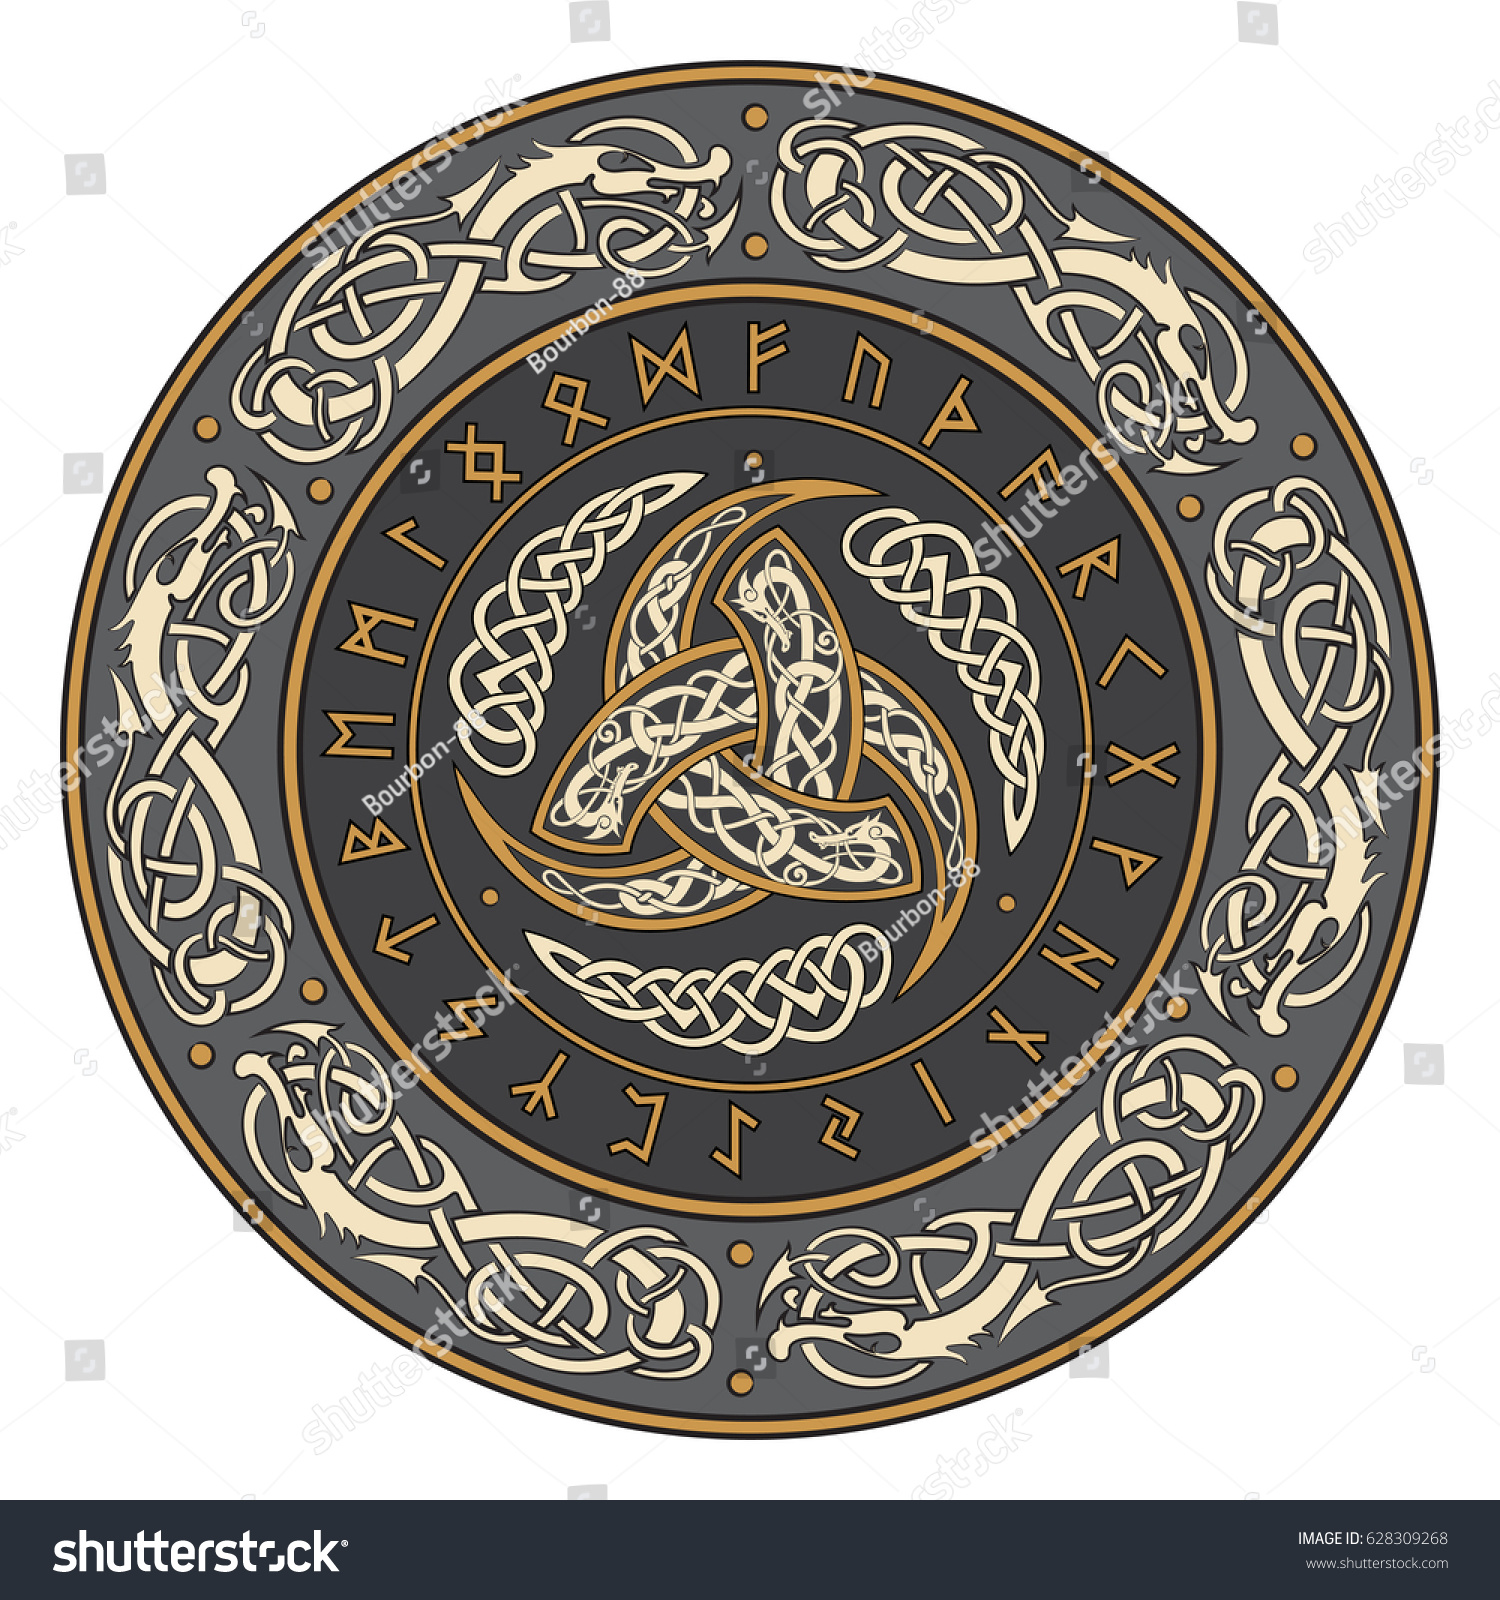 Triple Horn Odin Decorated Scandinavic Ornaments Stock Vector 628309268 ...